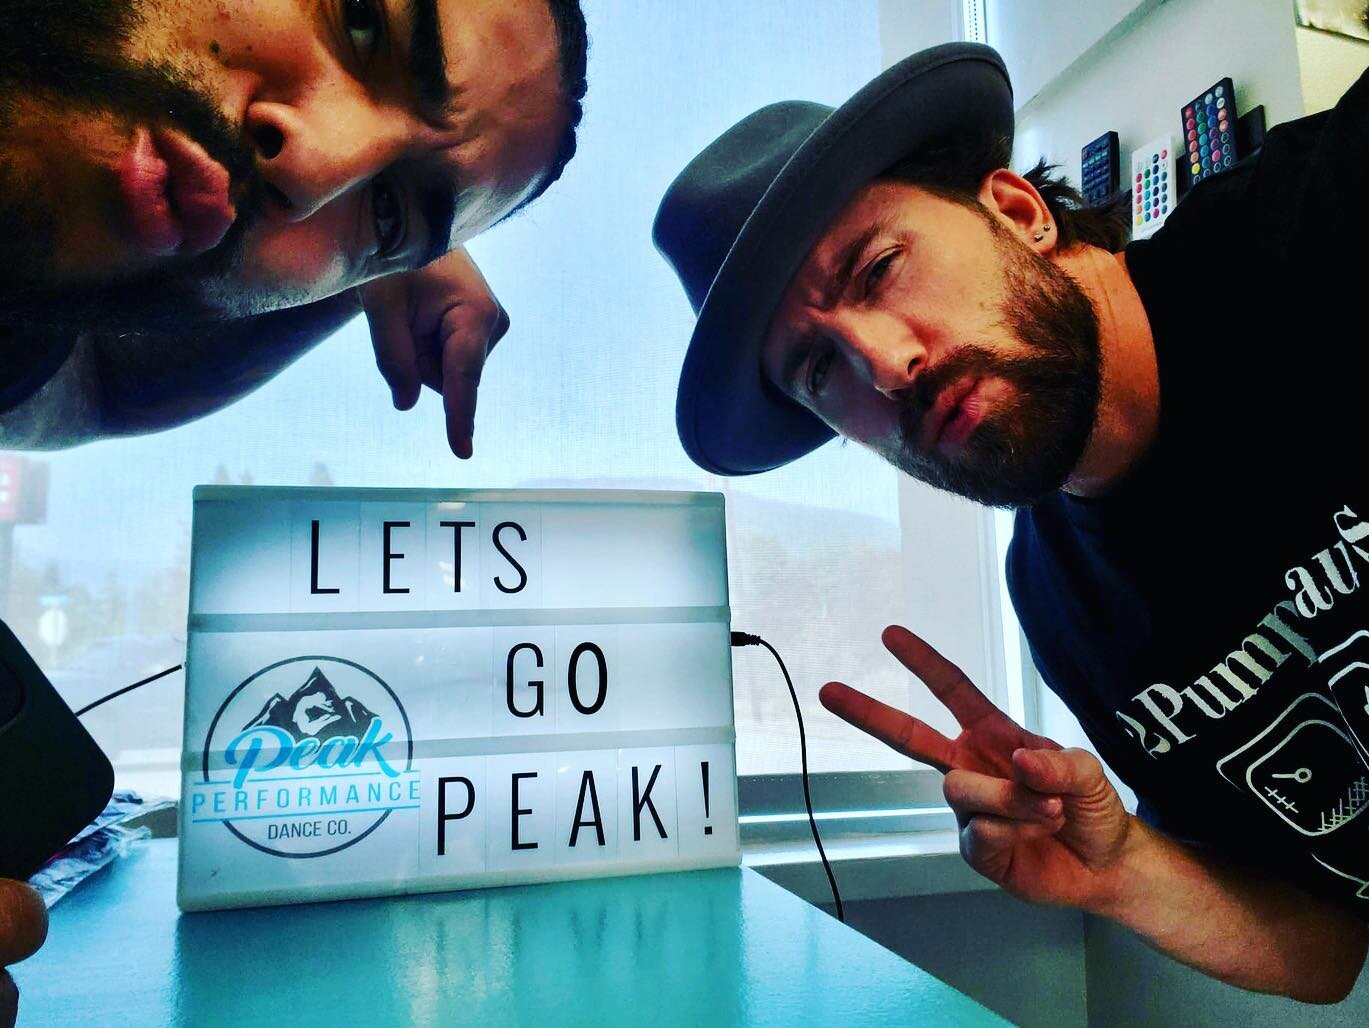 DAY 2 at @peakperformancedanceco #photodump 

Welcome to G2 Entertainment! Western Canada's most immersive training and choreography company led by Edgar Reyes and Lukas Lock. 

We deliver authentic Hip Hop productions &amp; training workshops to stu